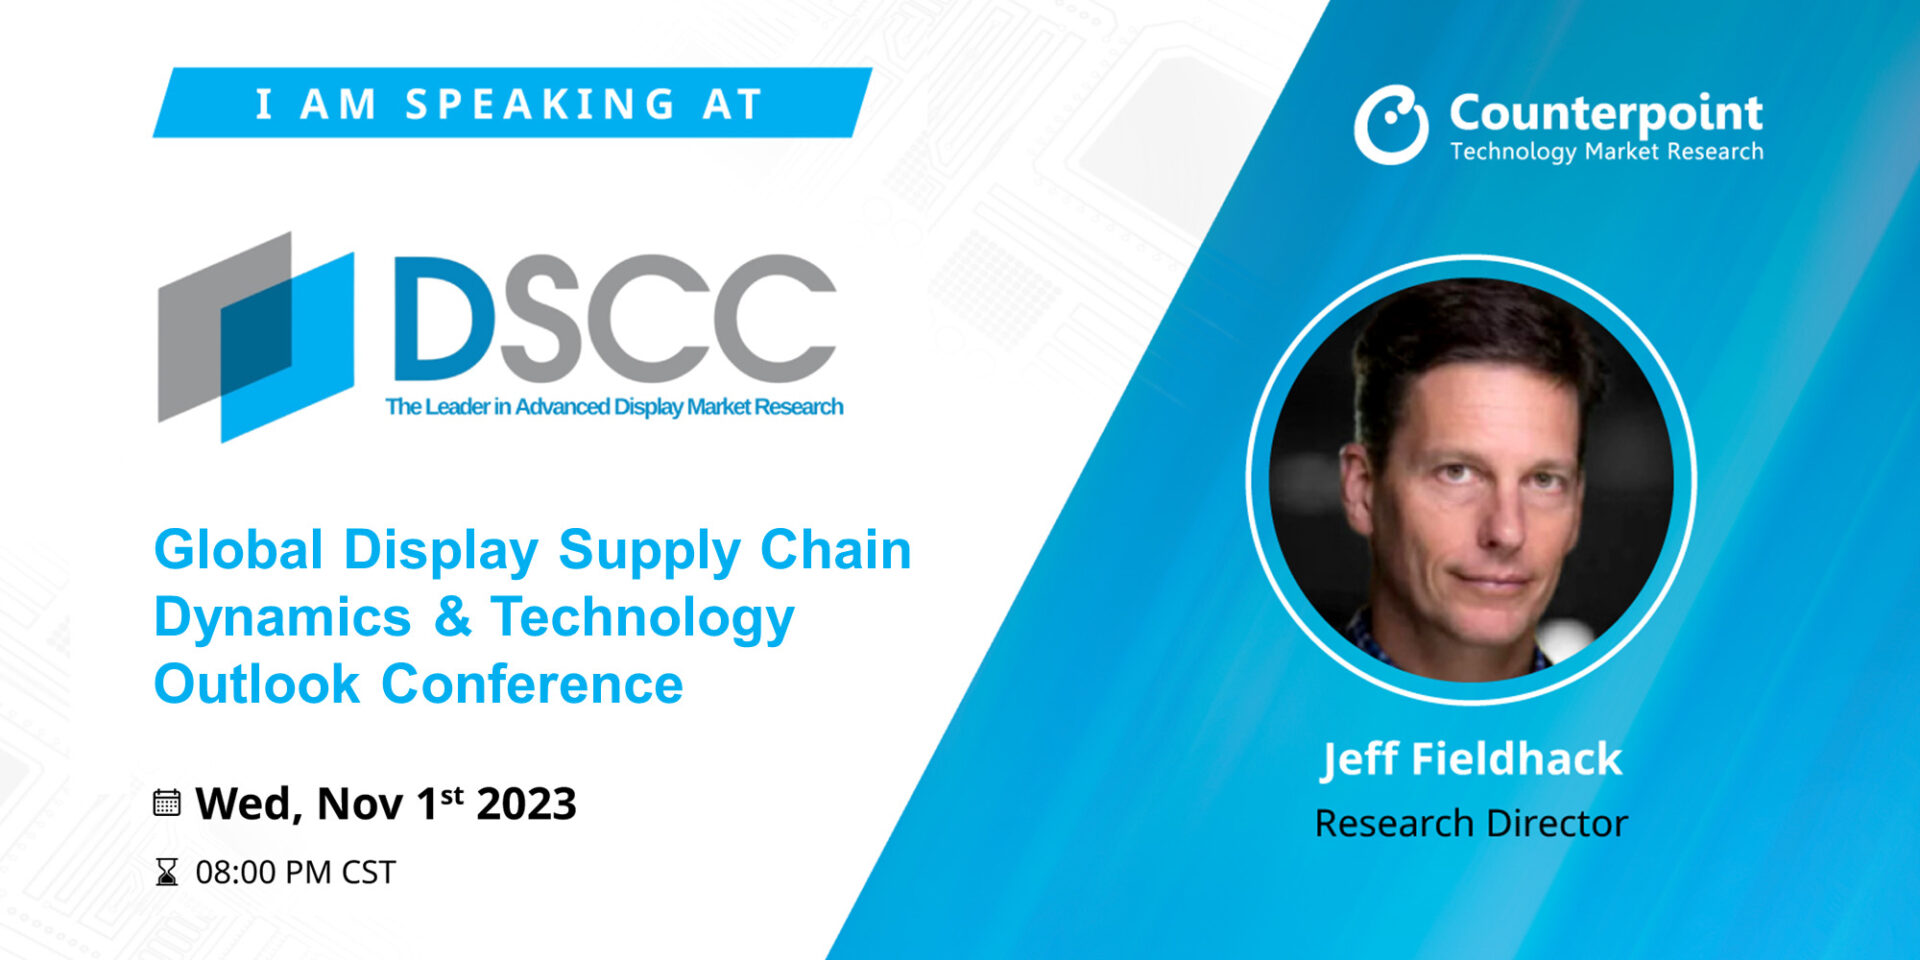 Meet Counterpoint Research at DSCC Global Display Supply Chain Dynamics & Technology Outlook Conference 2023